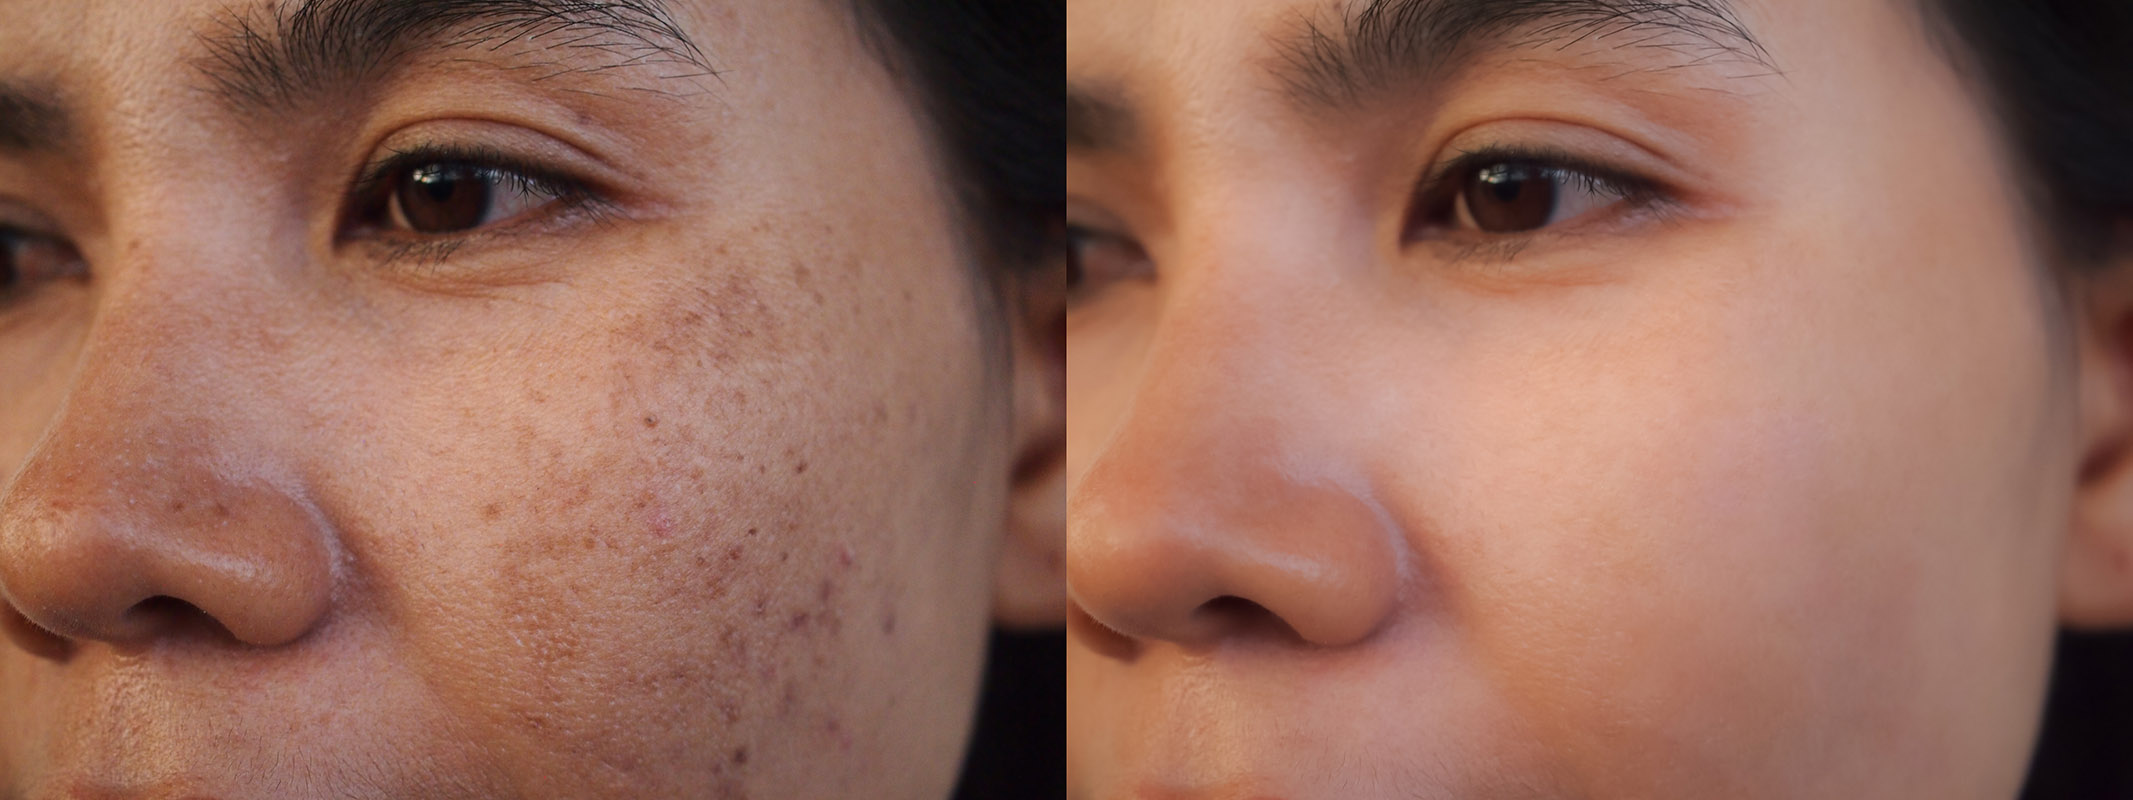 Closeup asian woman before and after dark spot melasma scar acne pigmentation treatment on skin face. Problem skincare and health concept.